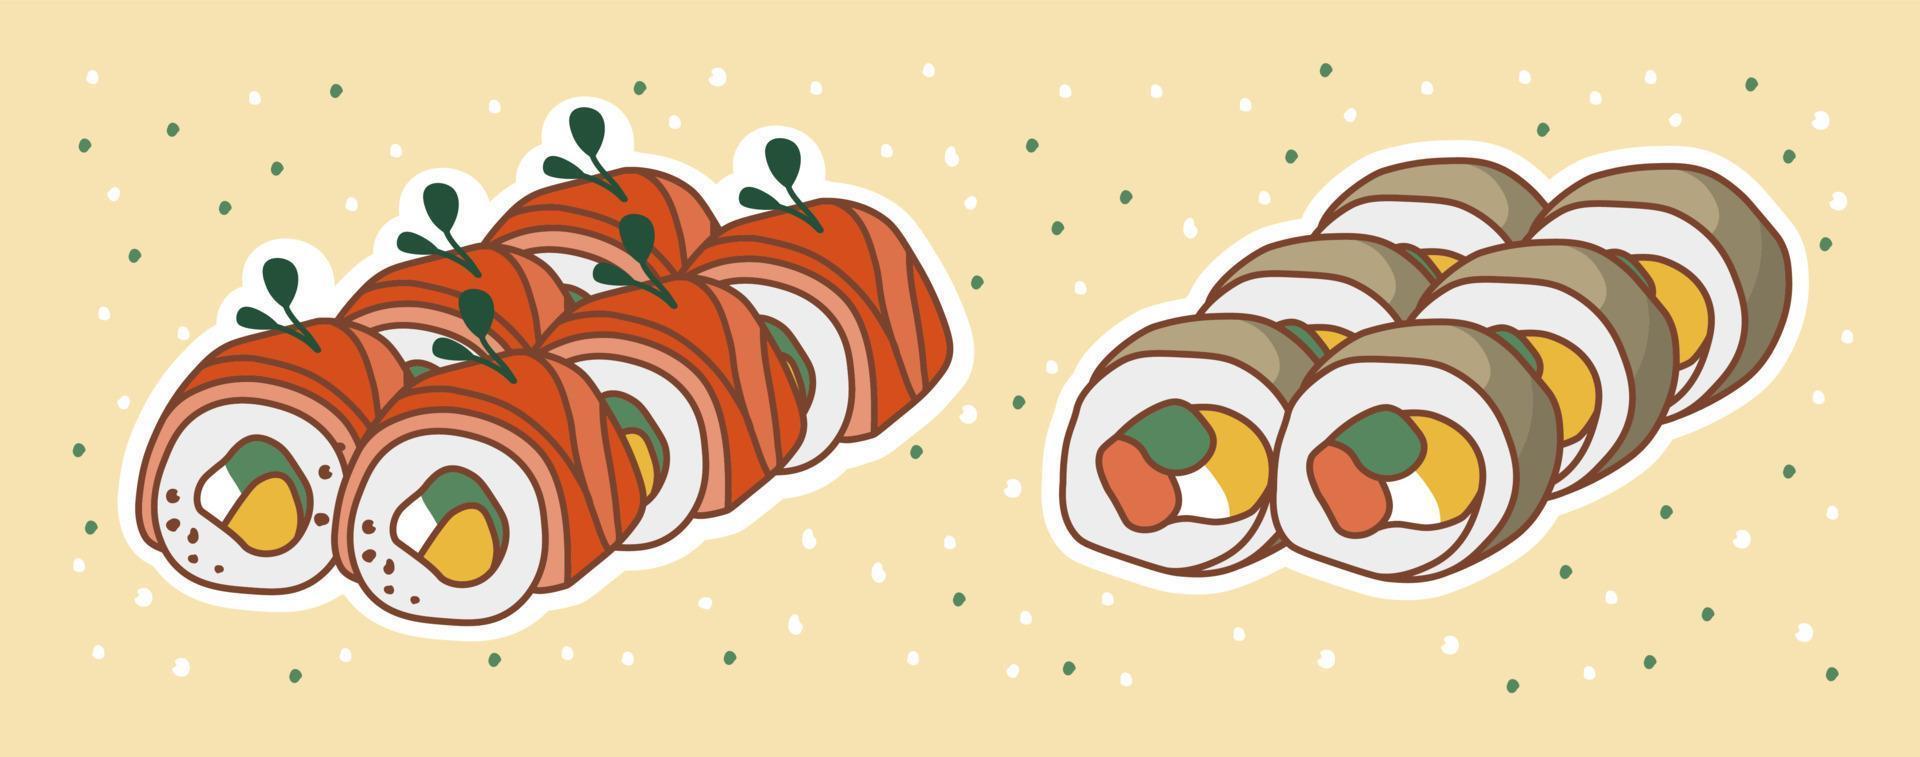 Illustration of sushi. Japanese food. Asian food stickers. Suitable for restaurant banners, logos, and fast food advertisements. vector